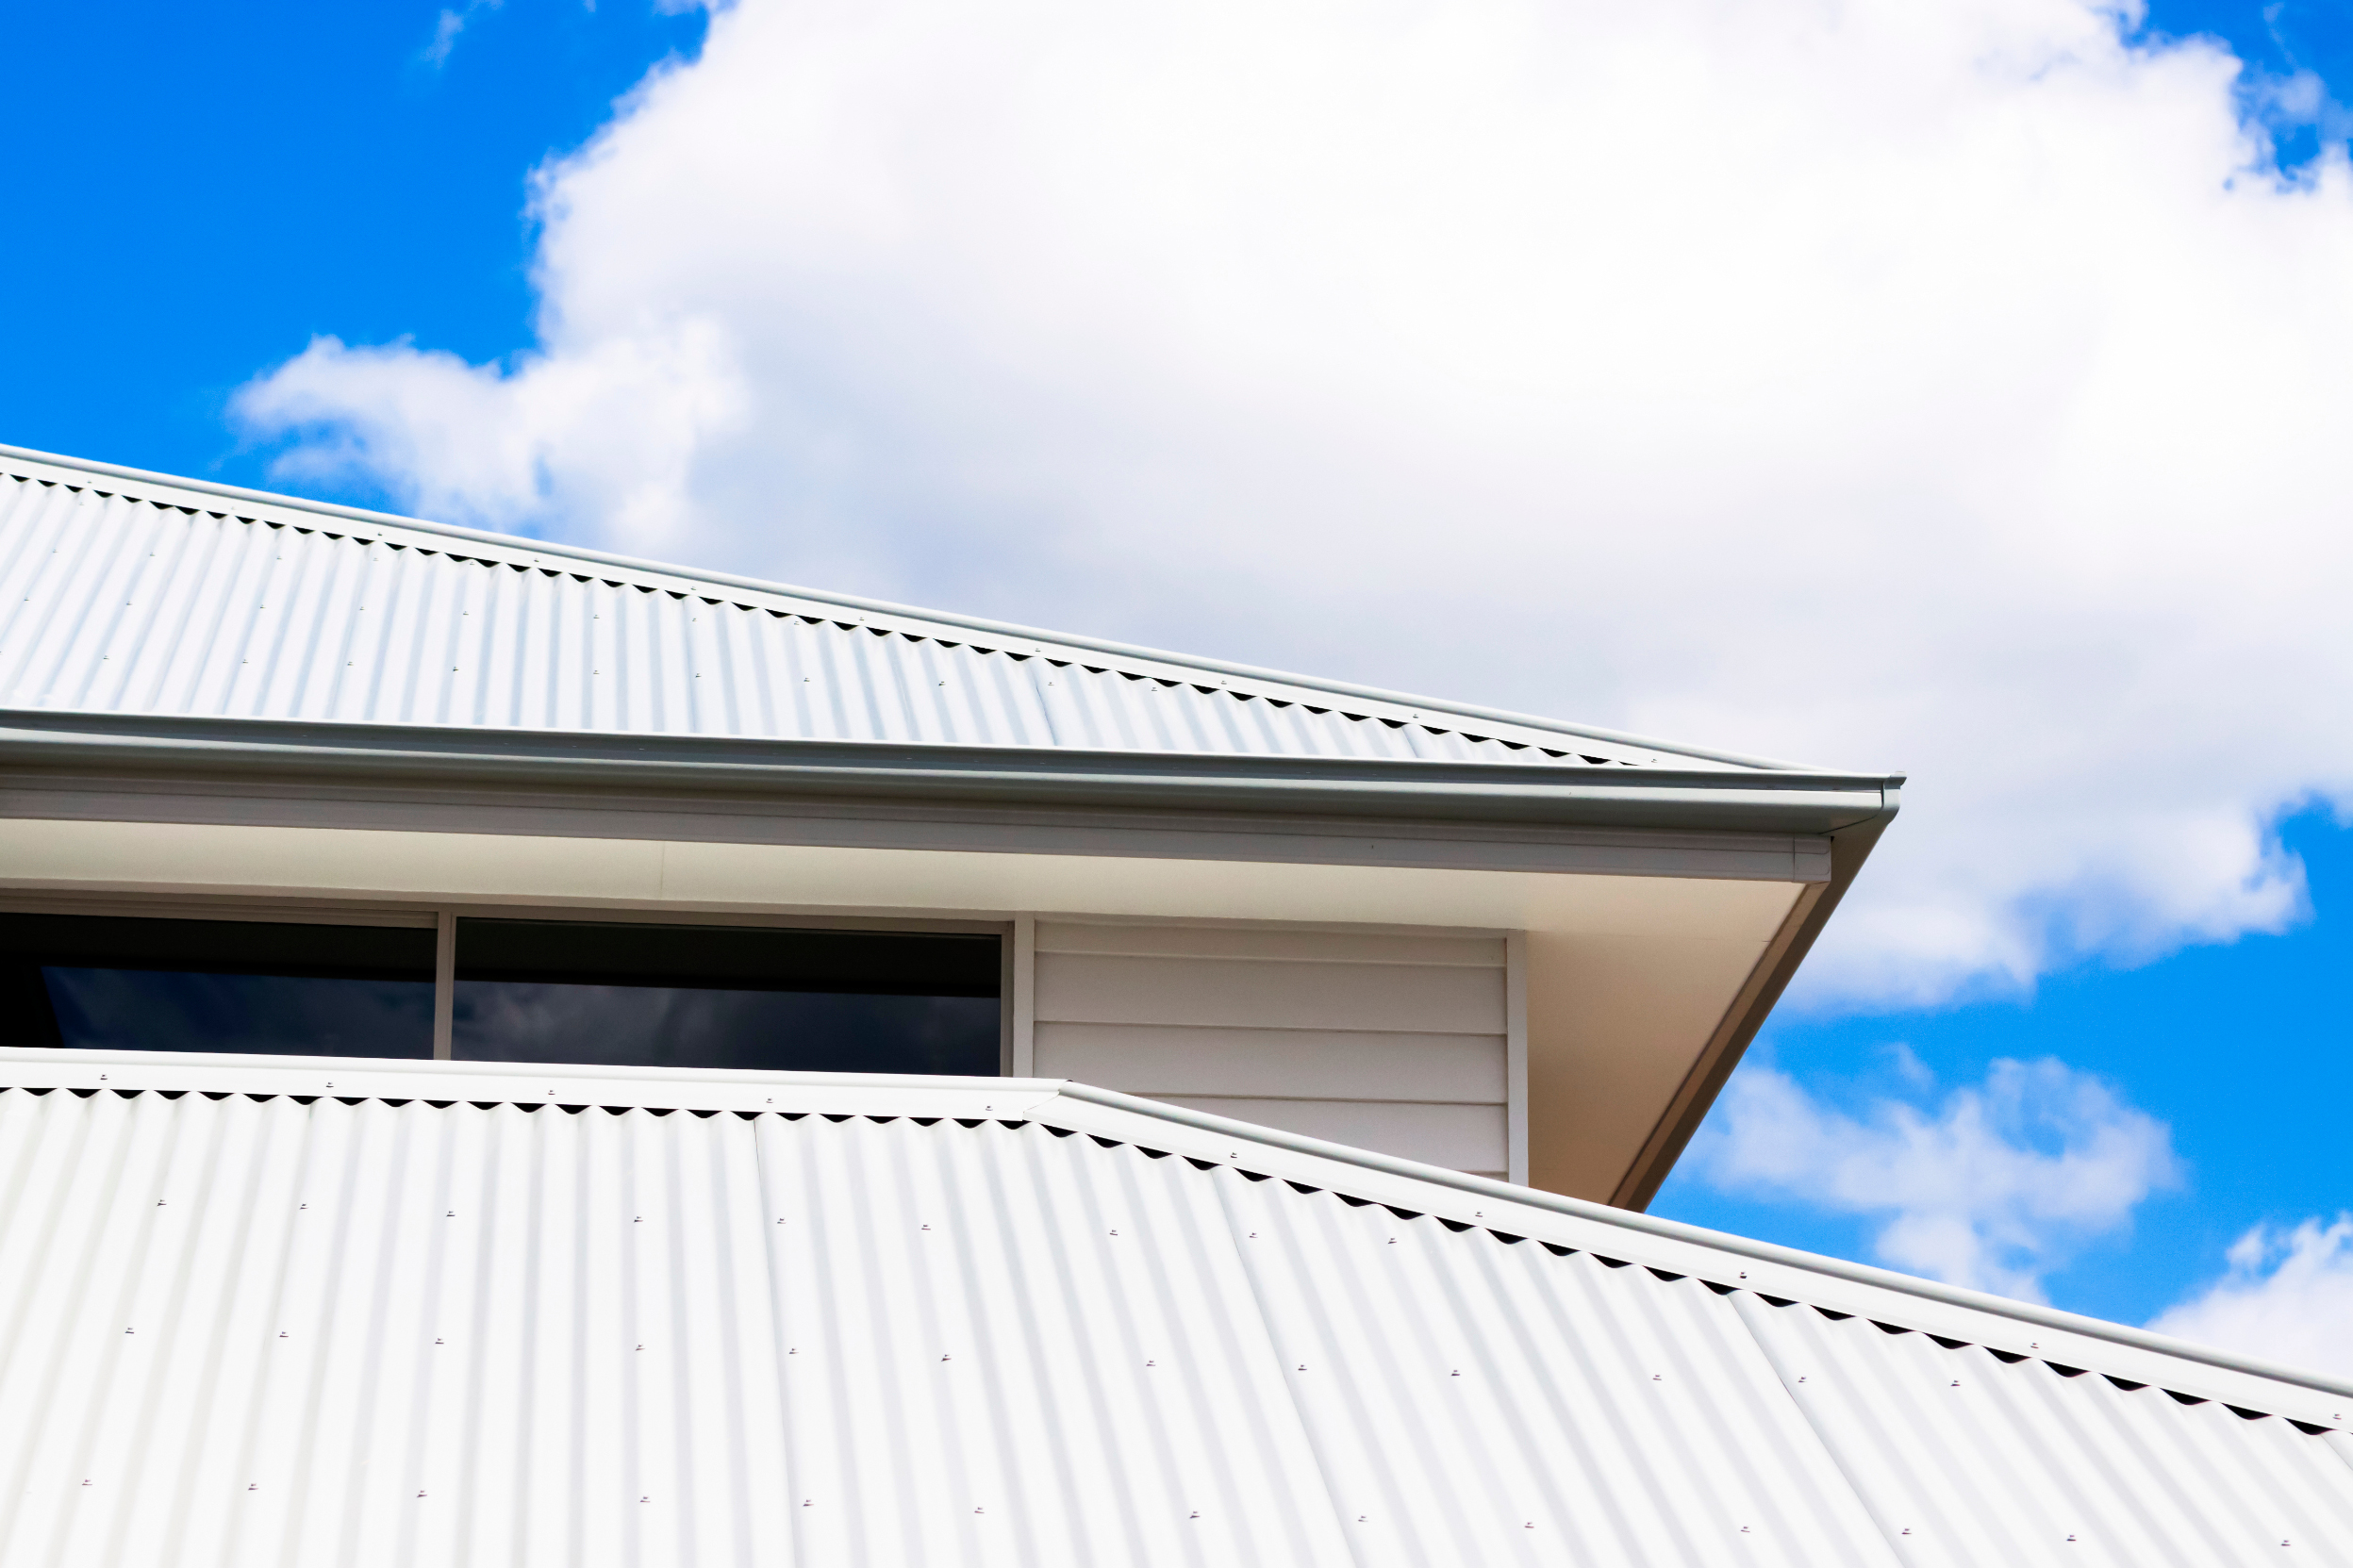 Closeup low angle view of corrugated iron roof of brand new house against blue sky with clouds, full frame horizontal composition with copy space